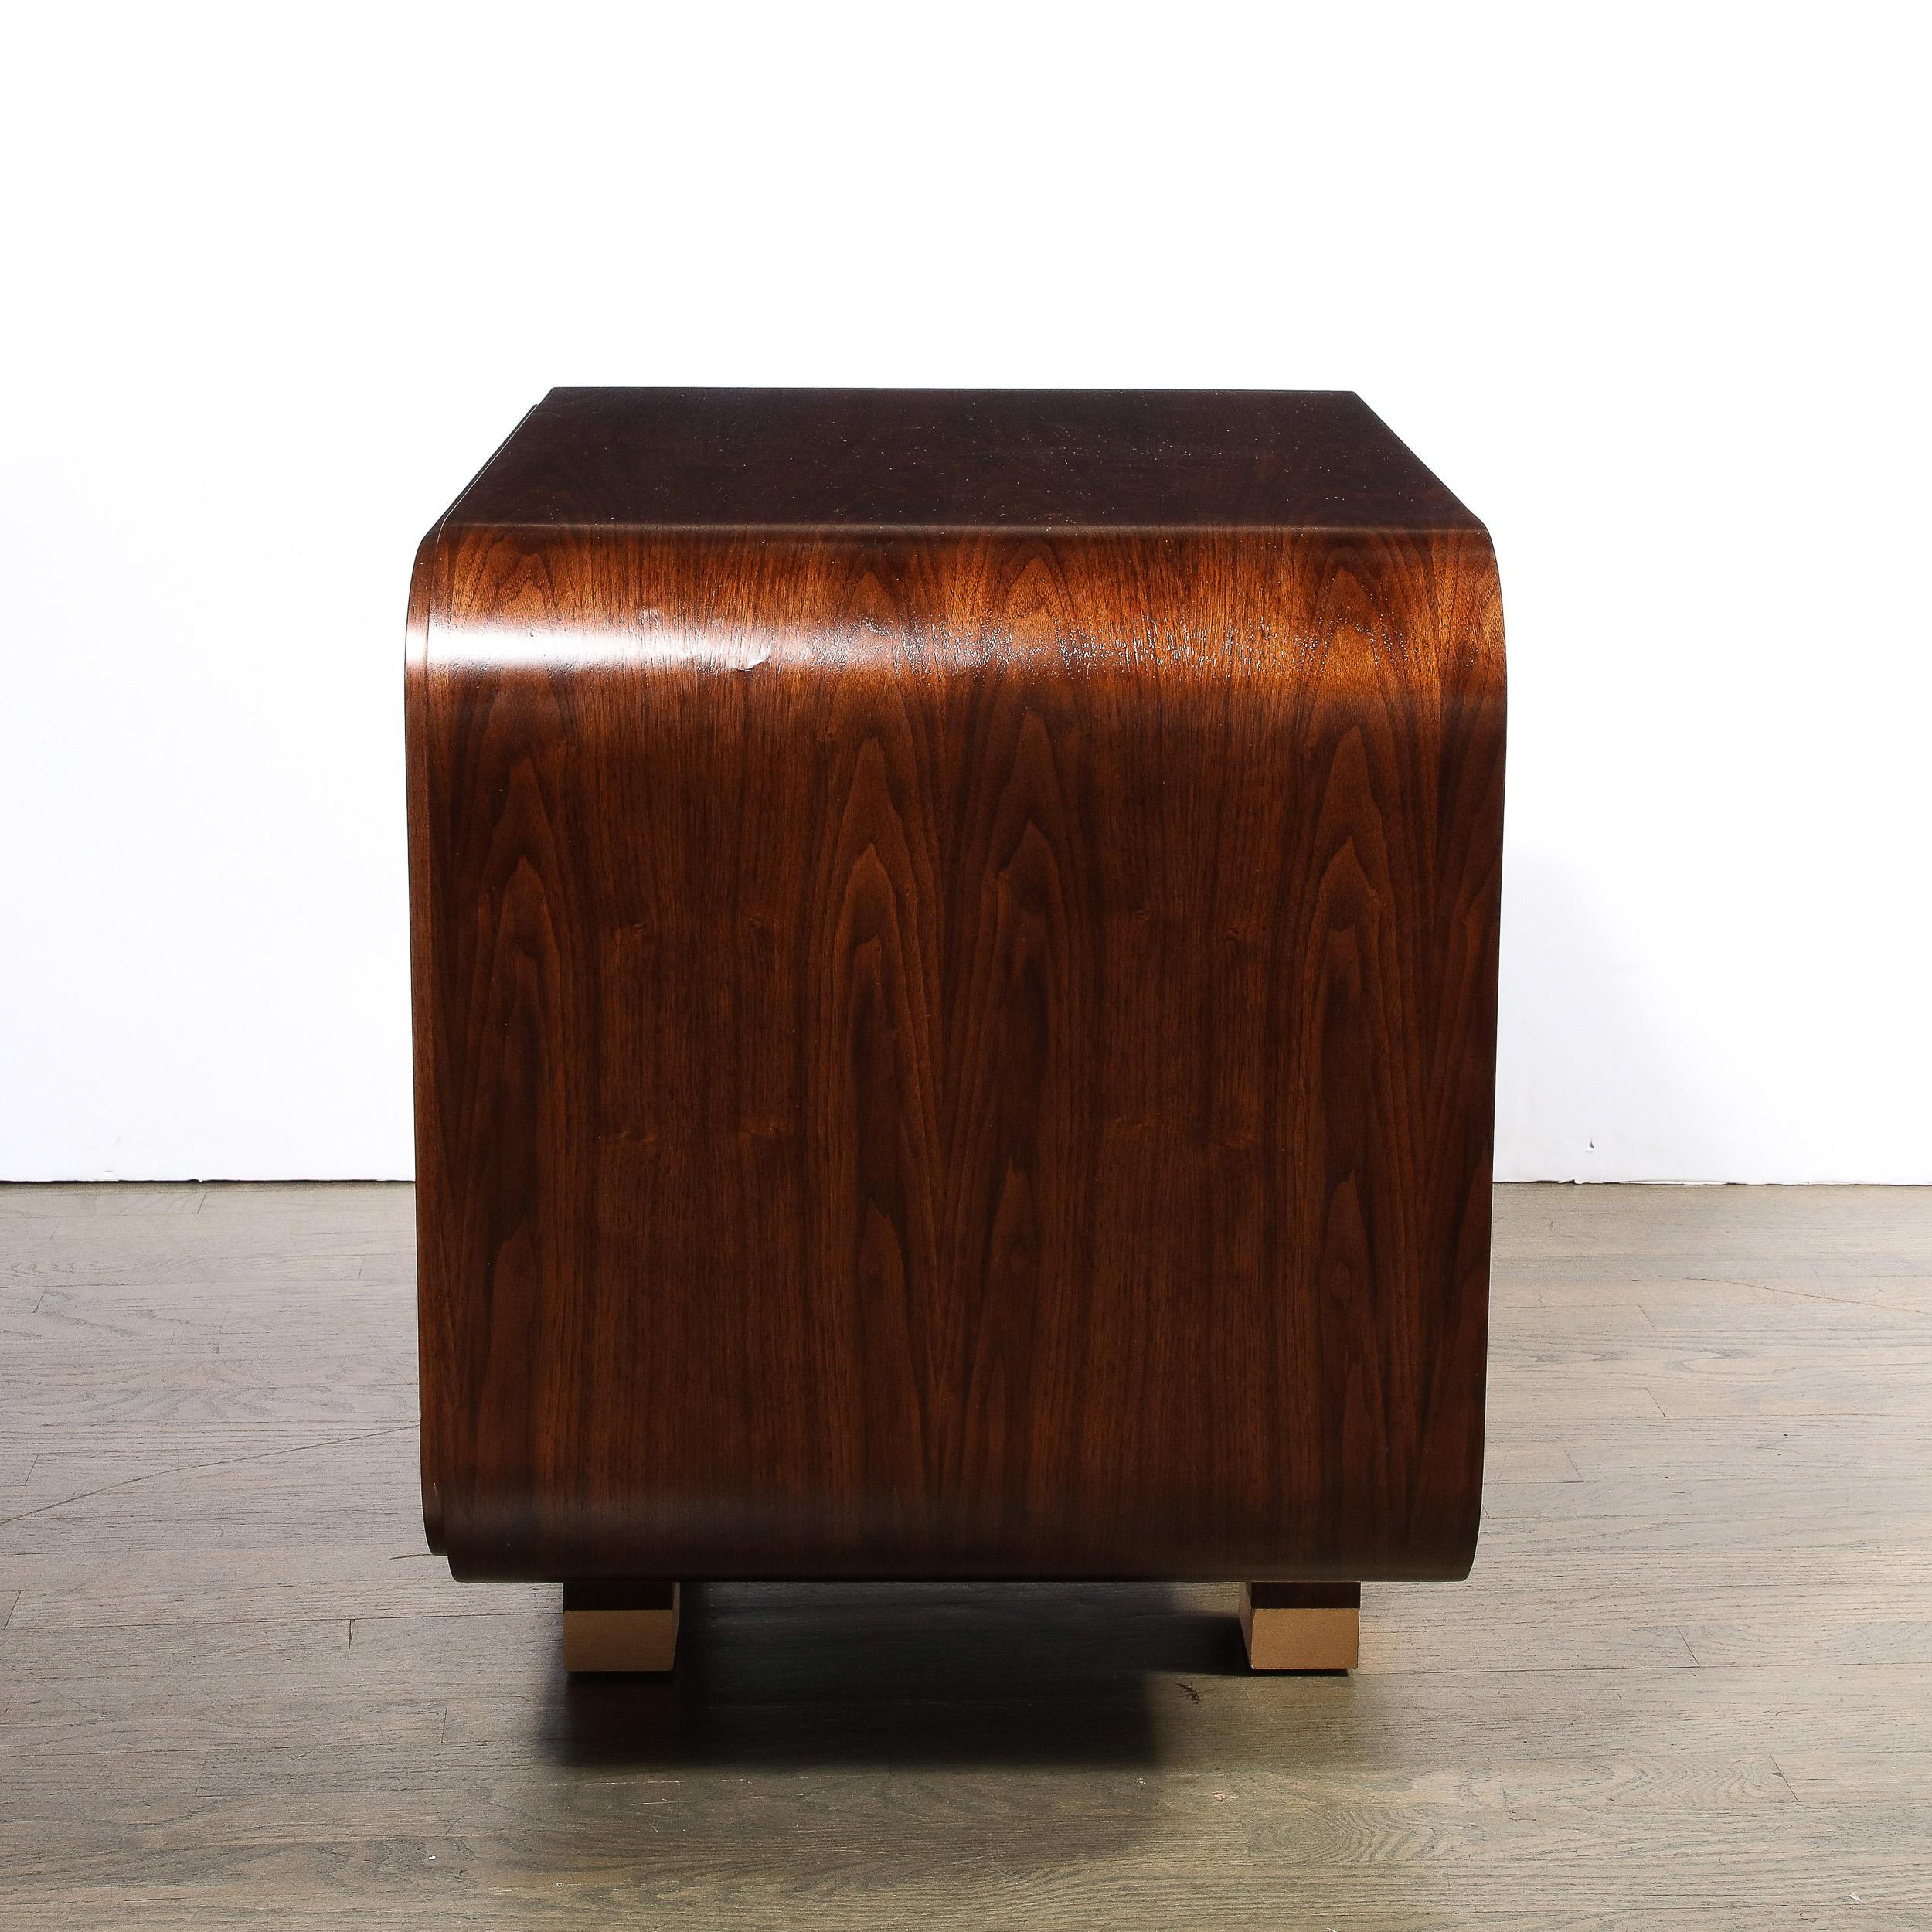 Custom High Style Art Deco Style Bookmatched Walnut Nightstands w Brass Sabots In New Condition For Sale In New York, NY